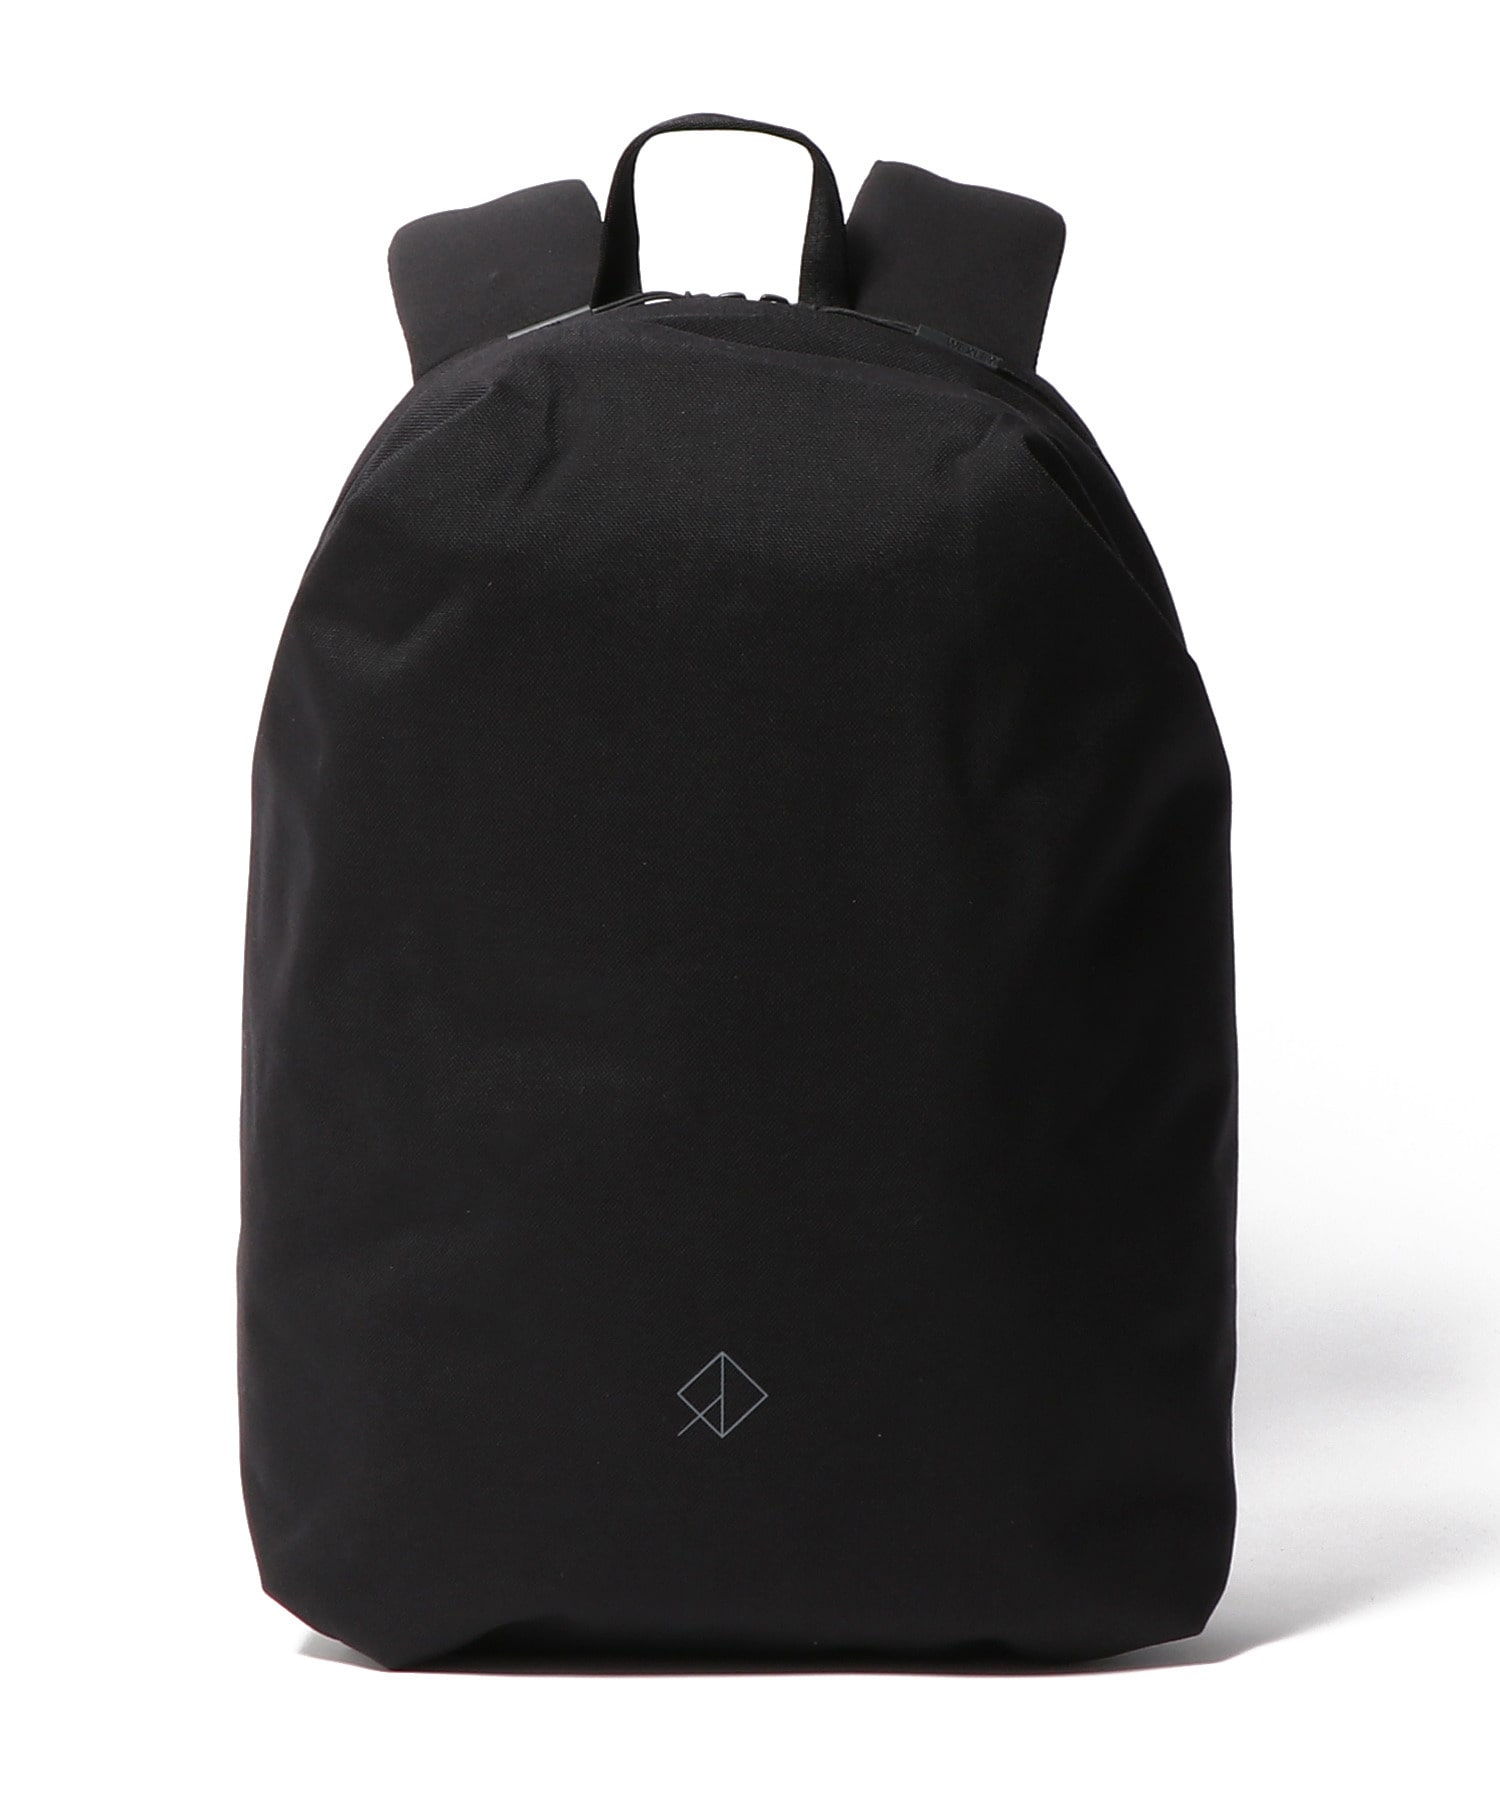 WEXLEY / URBAN BACKPACK CORDURA バックパック｜ESTNATION ONLINE STORE｜エストネーション 公式通販